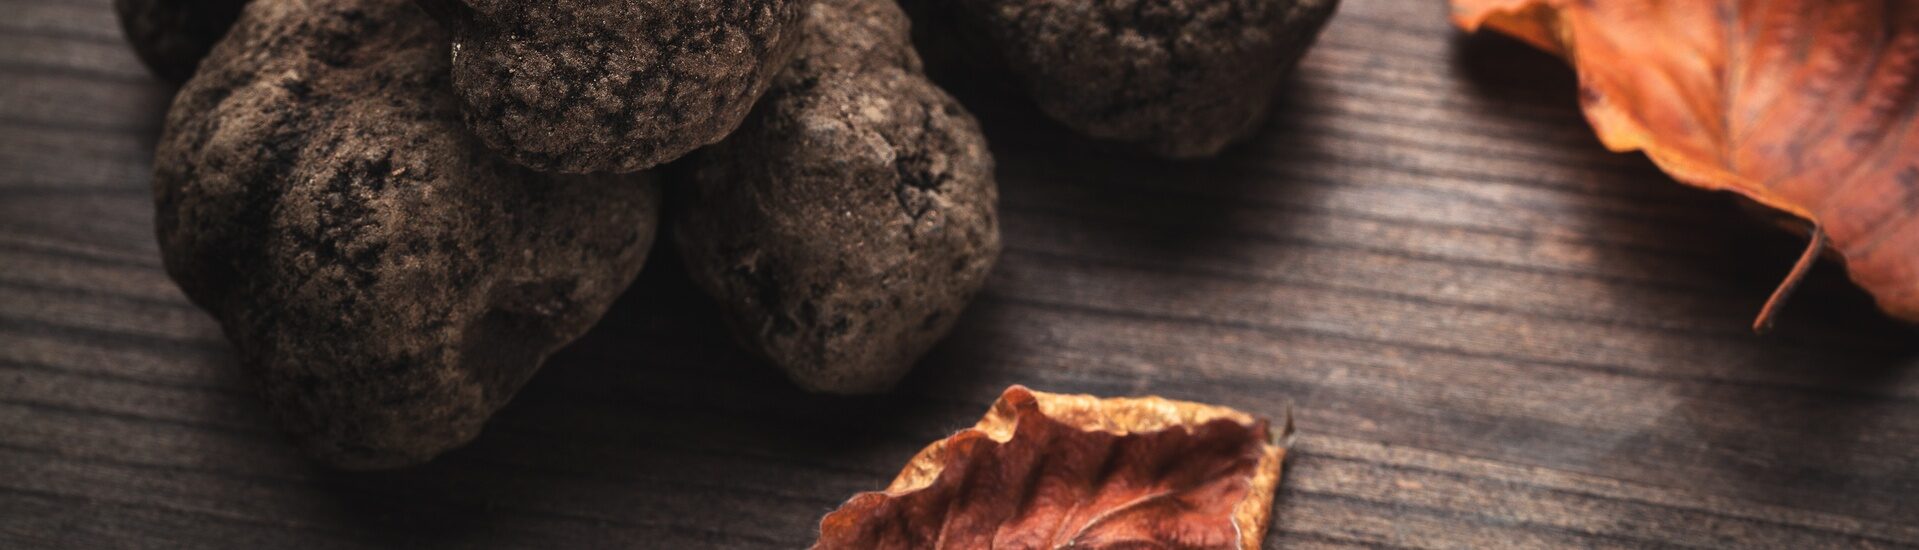 Understanding Basic Principles for Black Truffle Cultivation by Christine Fischer